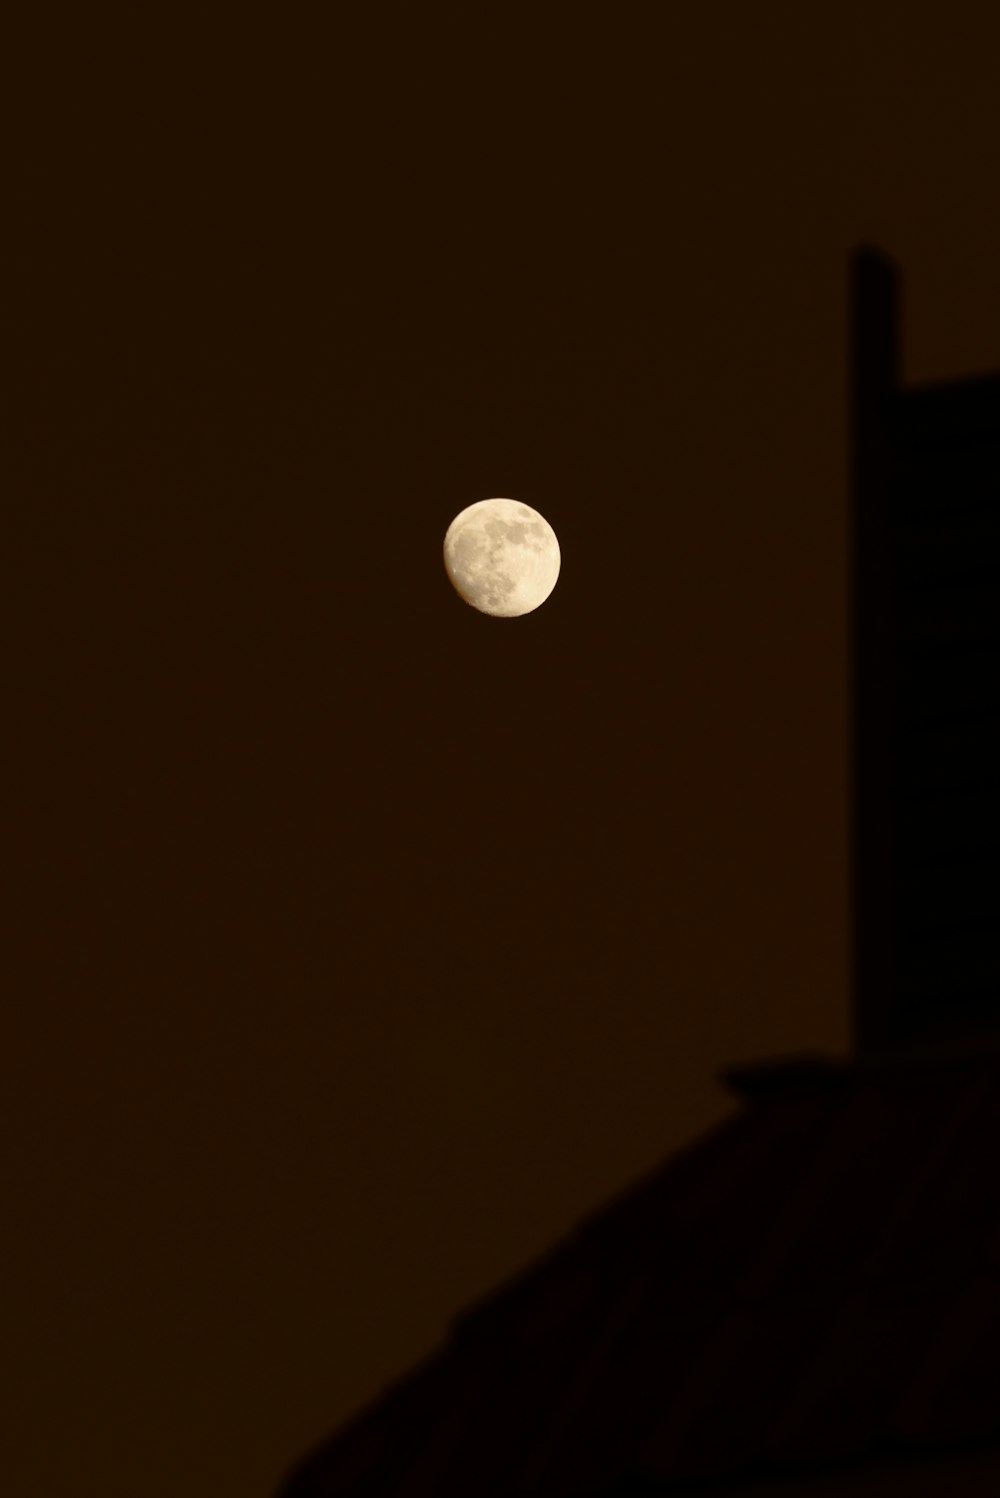 a full moon is seen in the sky above a building